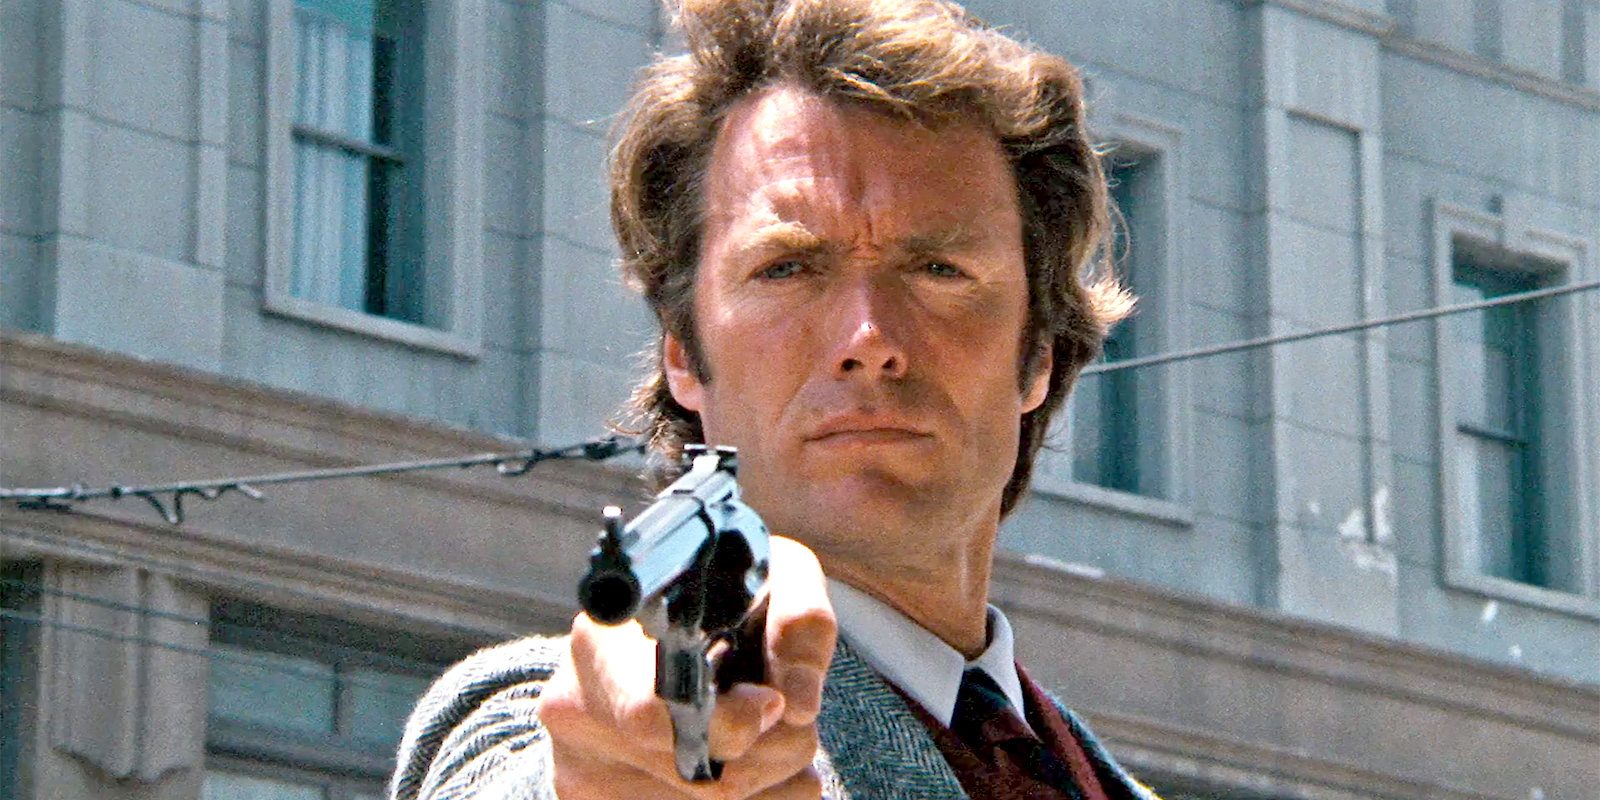 Clint Eastwood som Dirty Harry. Foto: Warner Bros. Pictures.